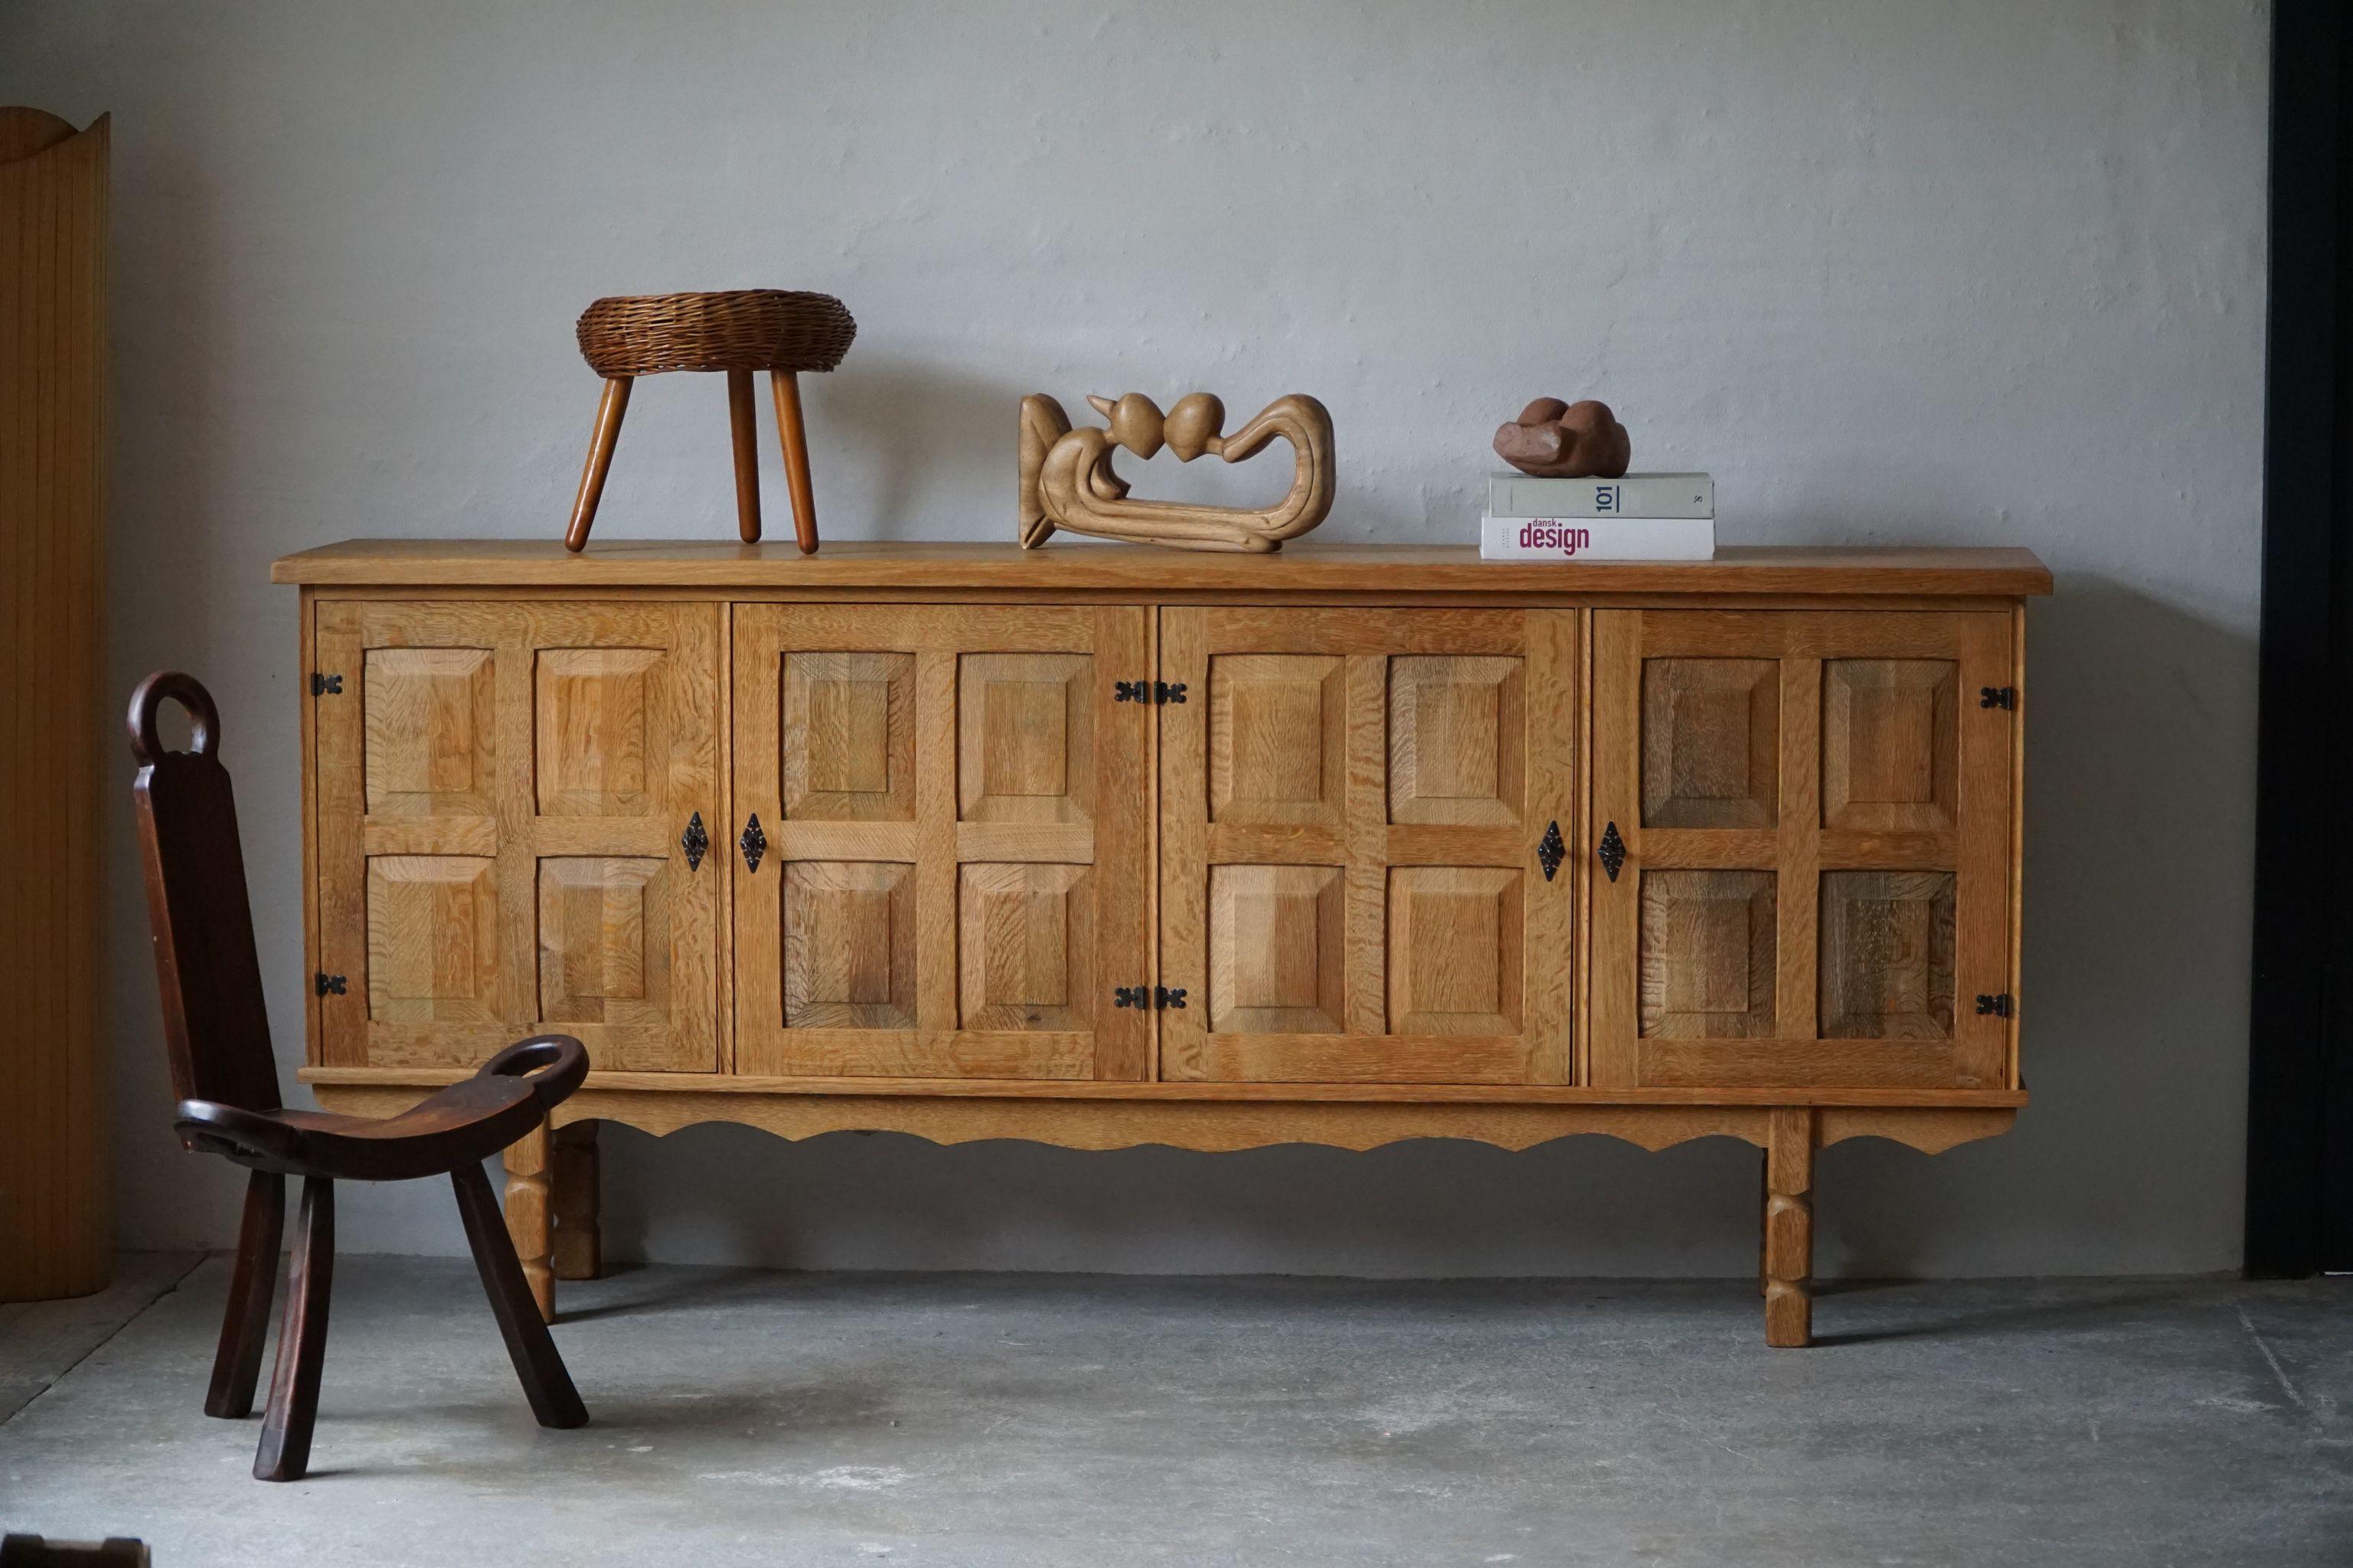 Danish mid century low rectangular sideboard, made in solid oak, ca 1950s

A great patina and a nice sculptural Front Design. 

With a heavy focus on functionality, this design style leans toward modernism, while incorporating coziness. The